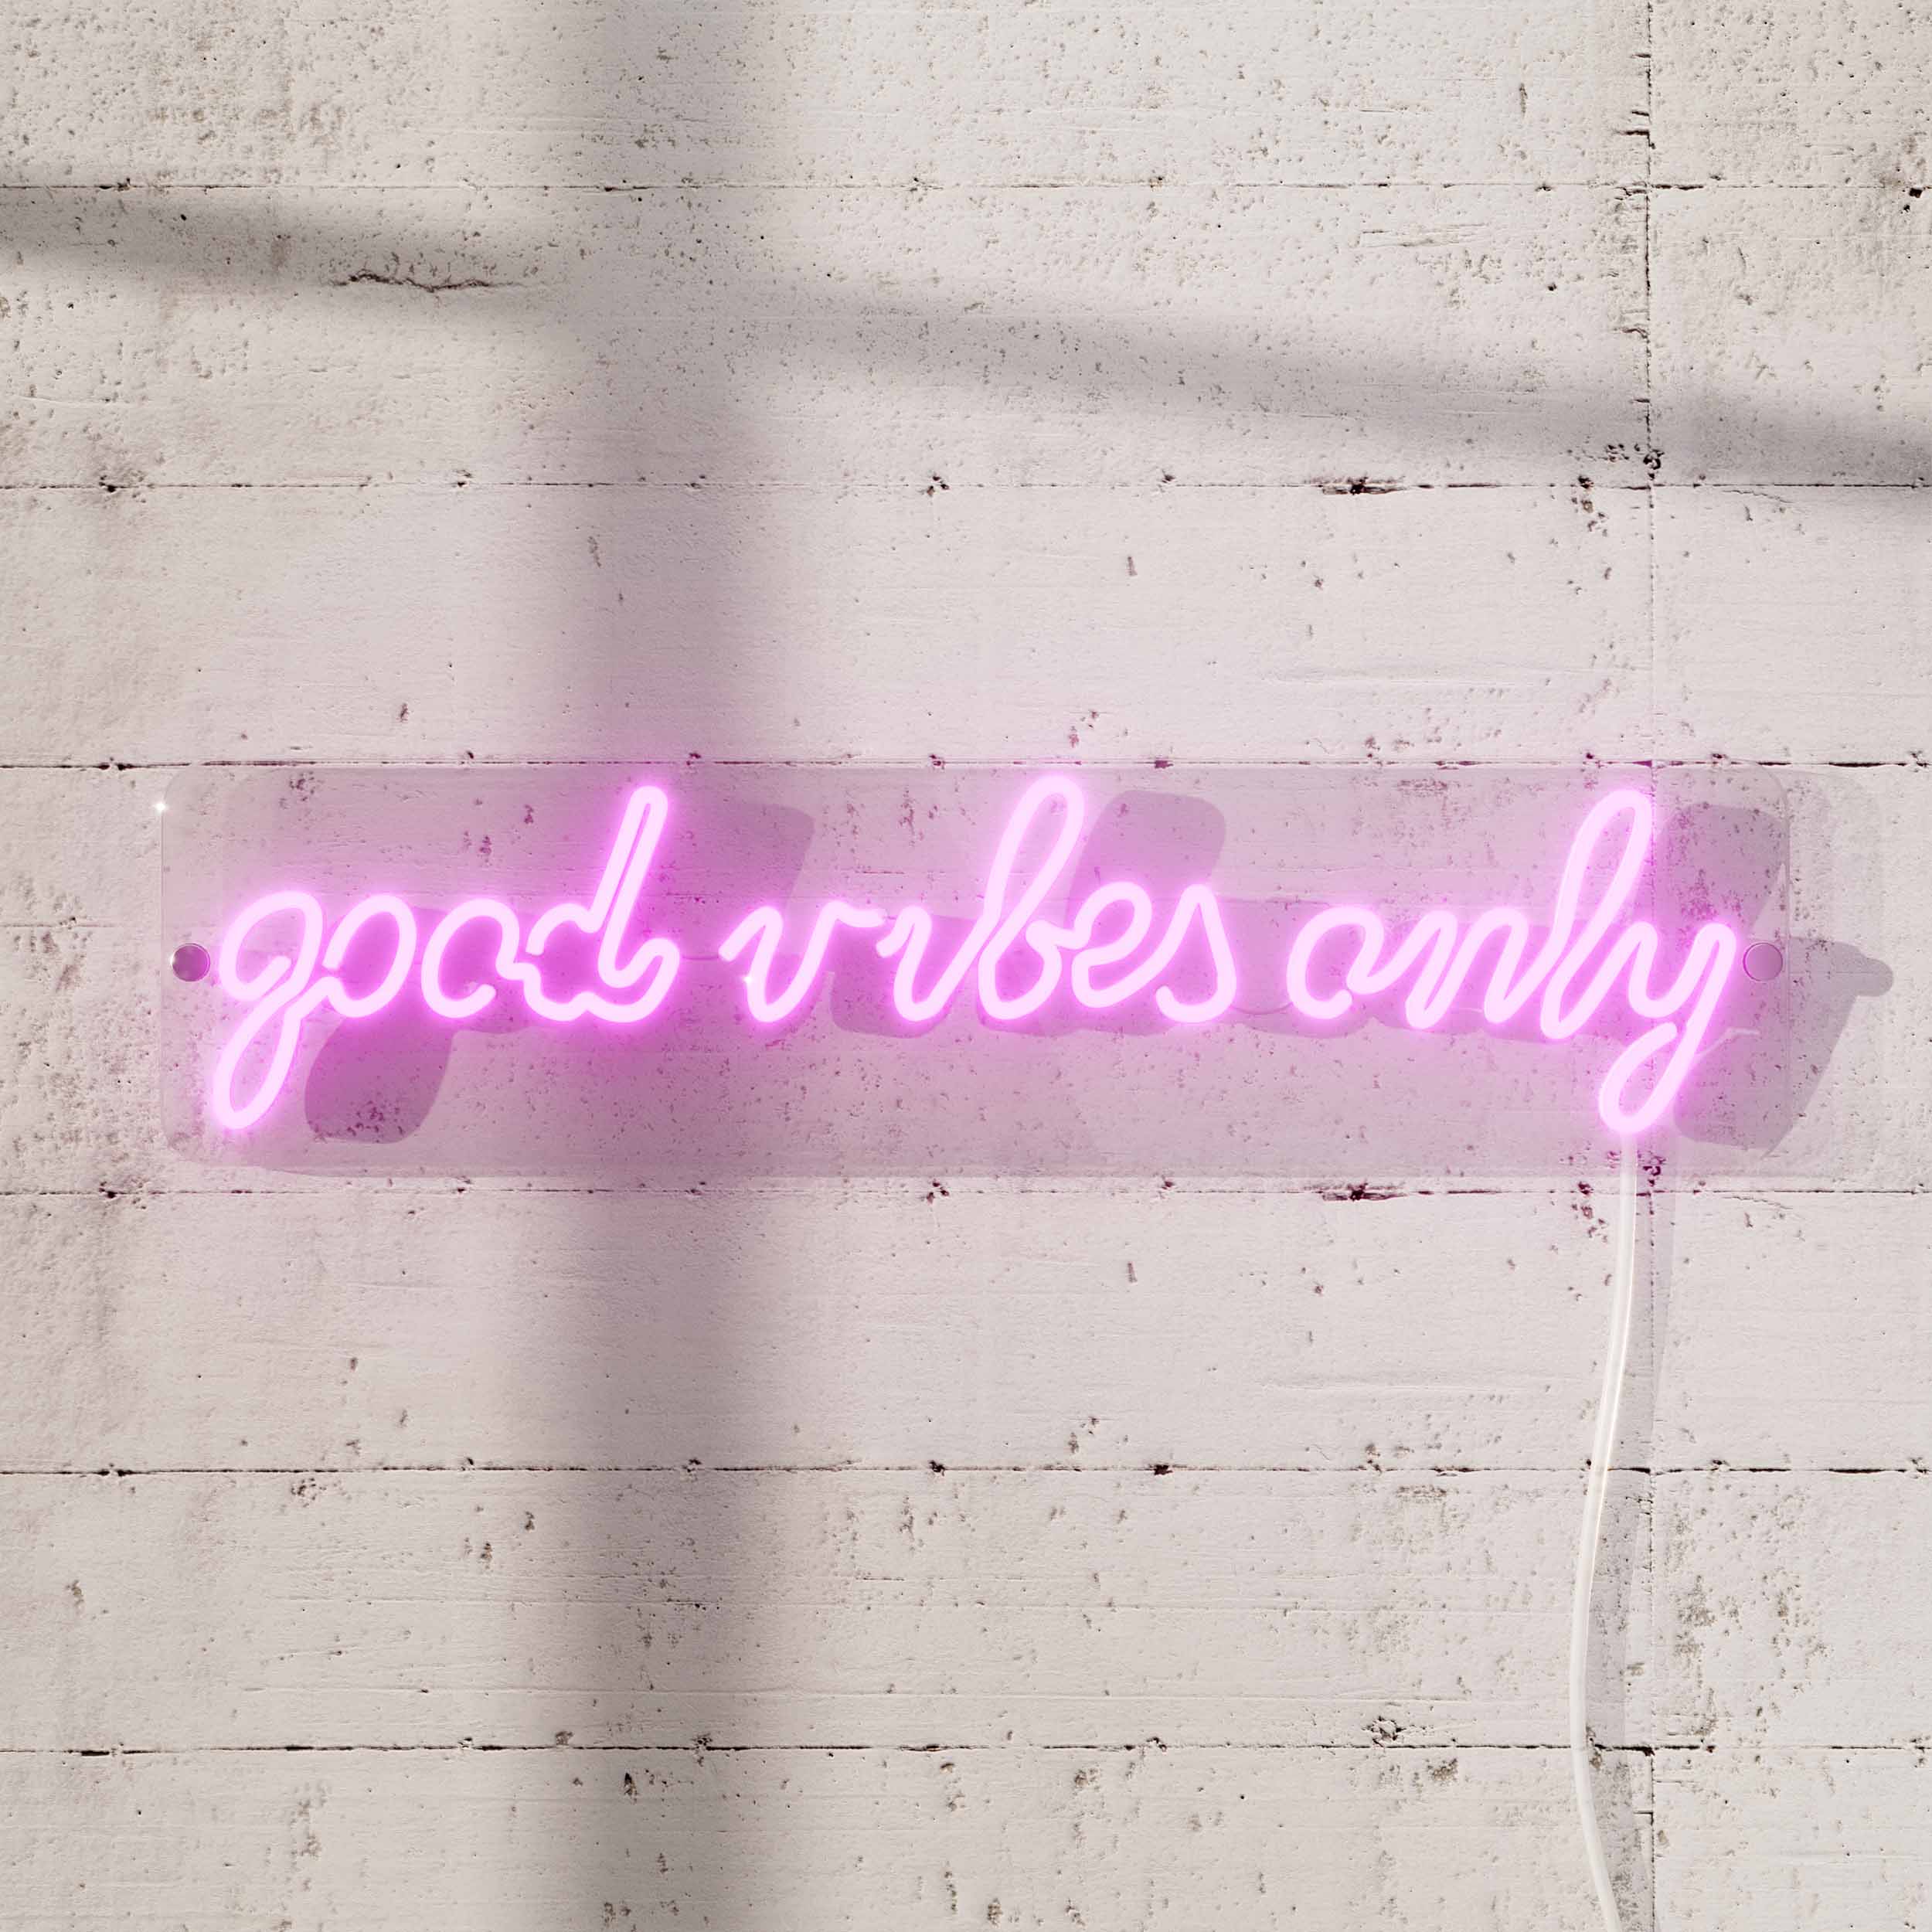 Neon Words - Good Vibes Only - Futility Play Smart